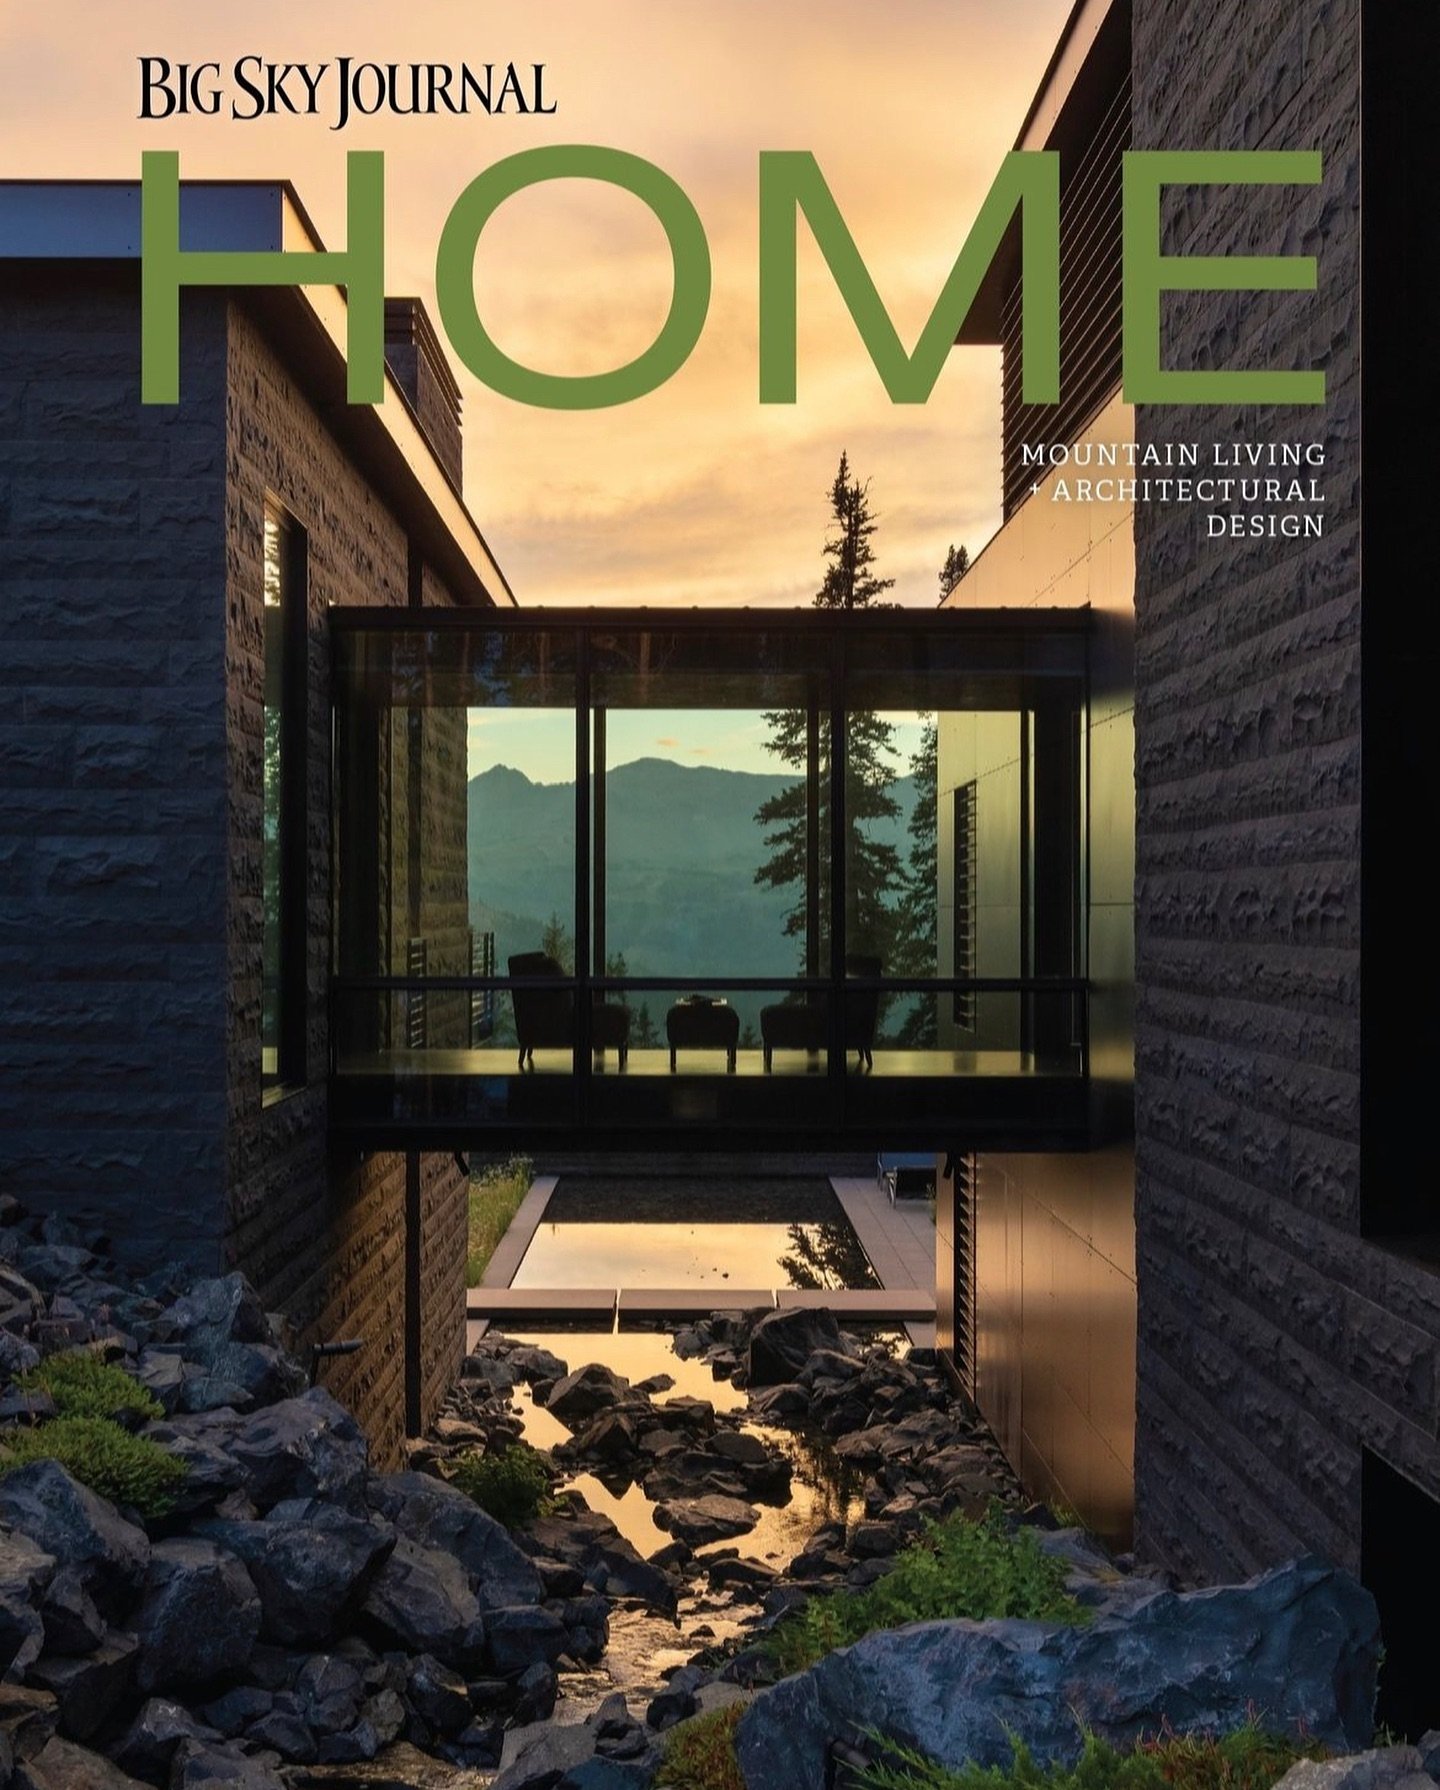 Big Sky Journal&rsquo;s annual HOME issue has hit the shelves! Can&rsquo;t wait to see my articles featuring projects in the Bitterroot Valley by @kiblerandkirch and in Jackson Hole by @clbarchitects. In the meantime, I&rsquo;m loving this stunning c